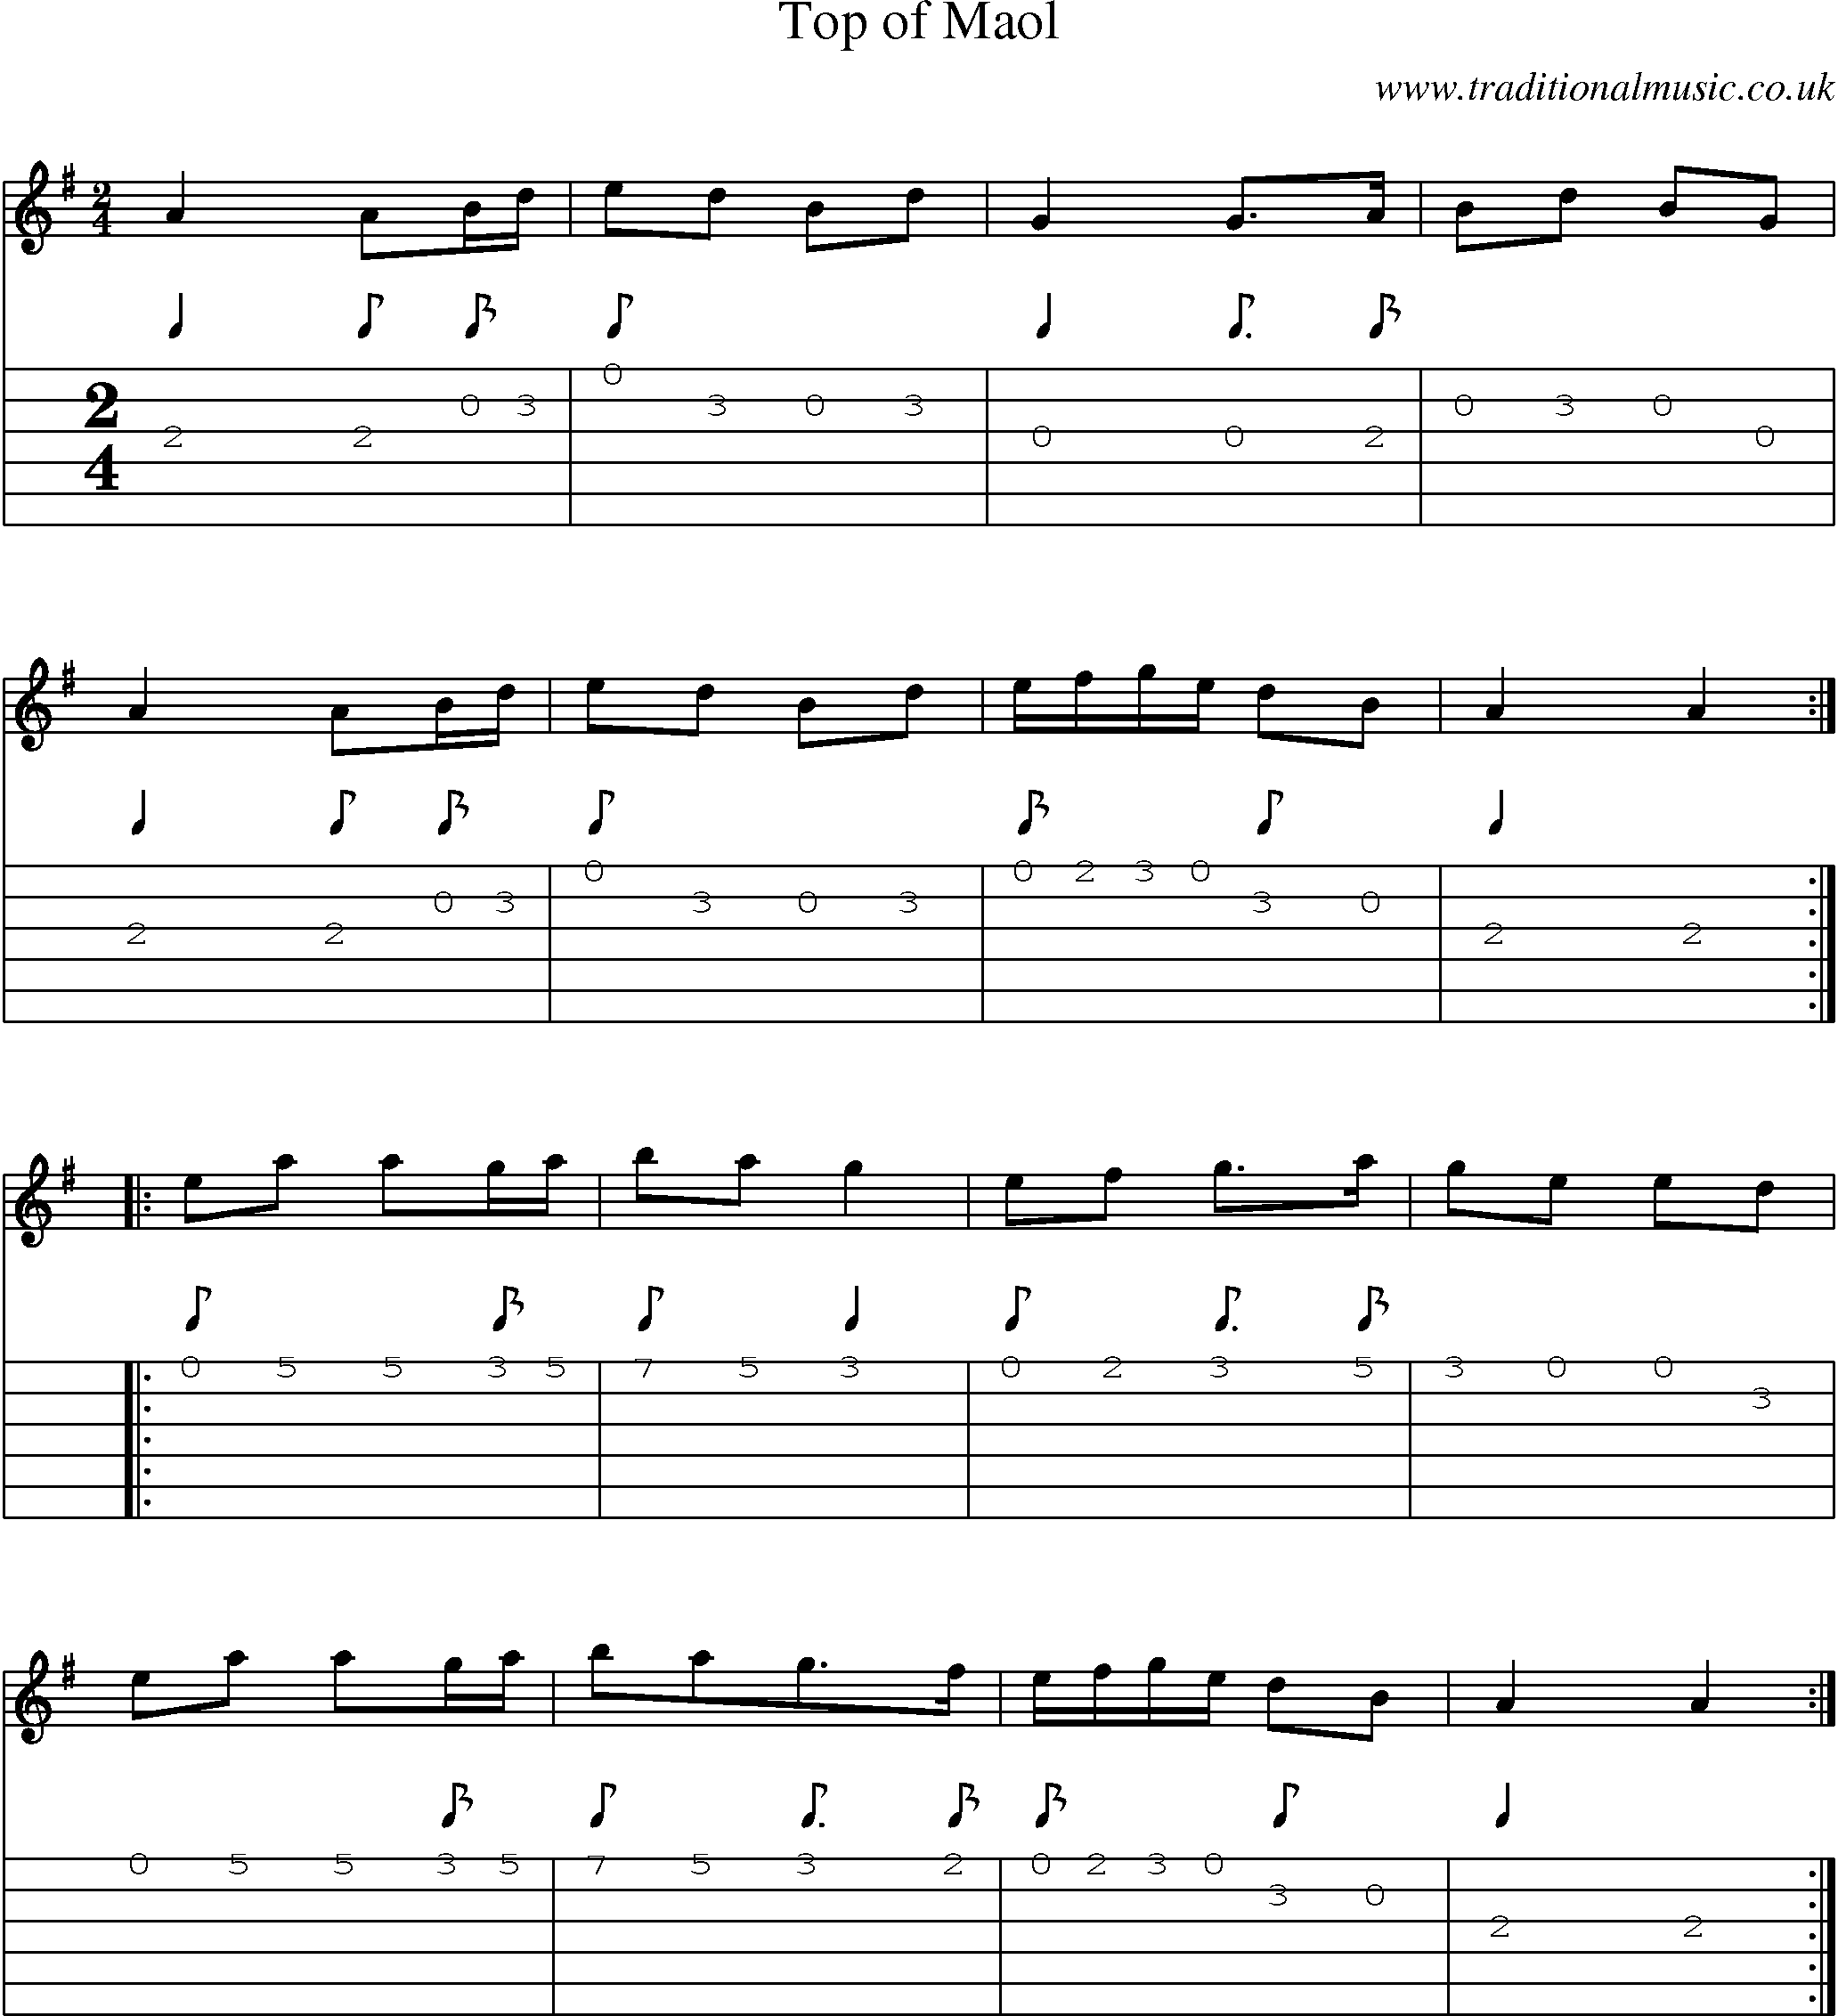 Music Score and Guitar Tabs for Top Of Maol